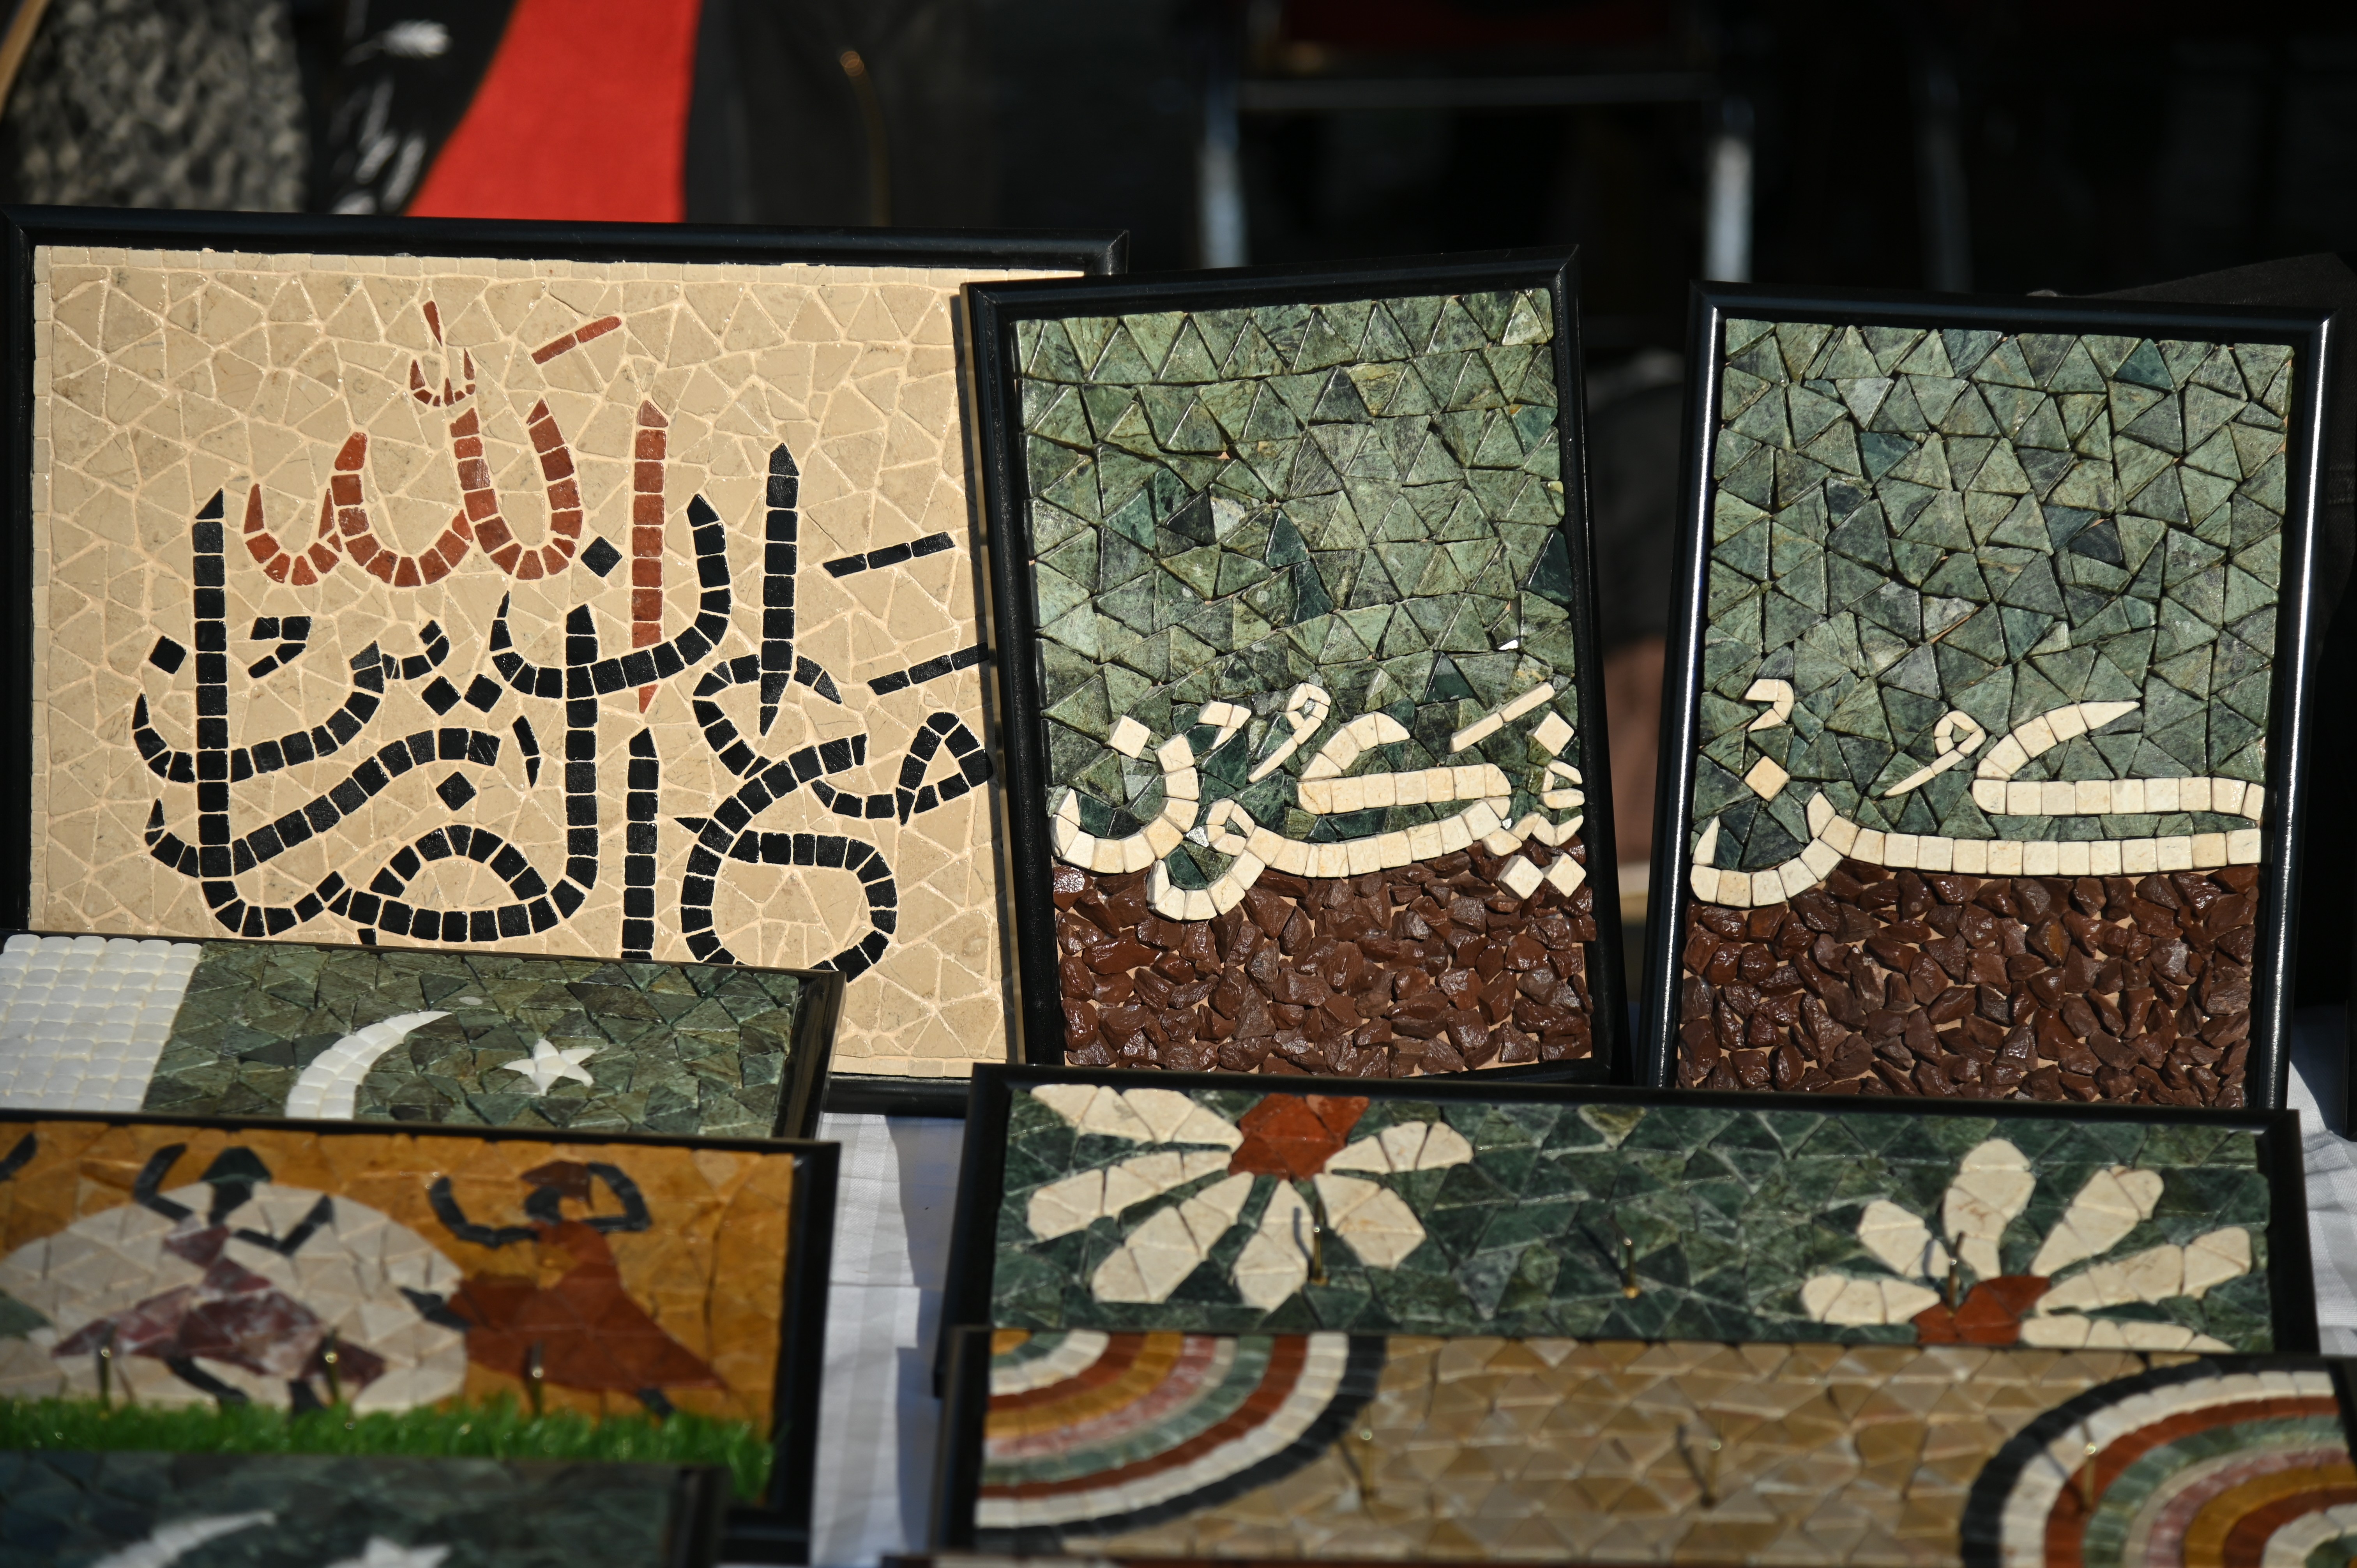 Arabic Calligraphy by using small stones